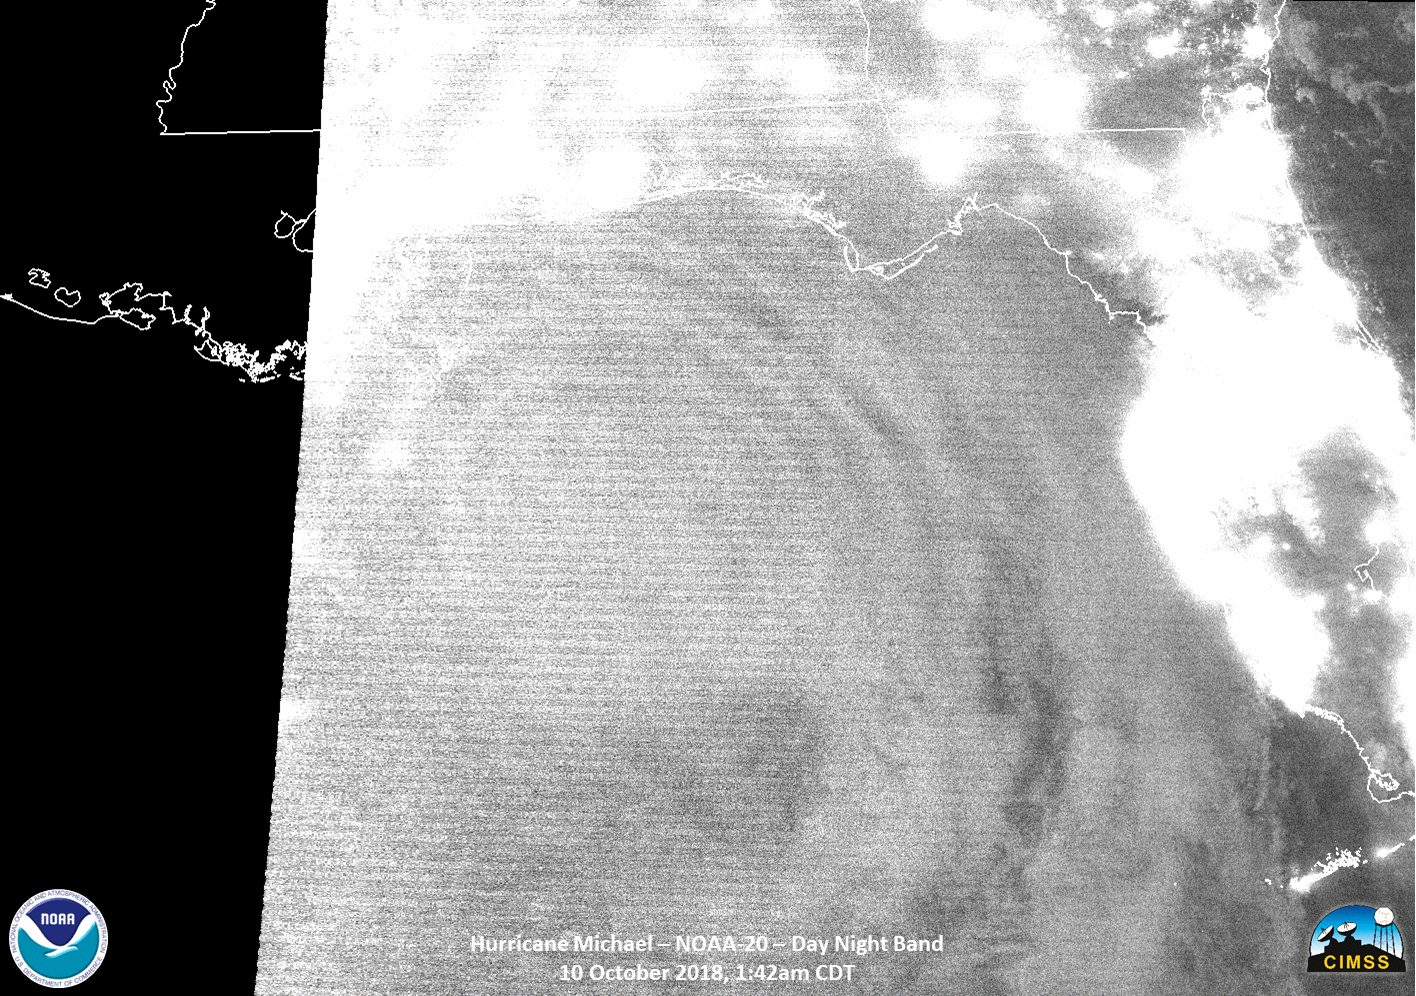 NOAA-20 VIIRS Day/Night Band (0.7 µm) and Infrared Window (11.45 µm) images [click to enlarge]